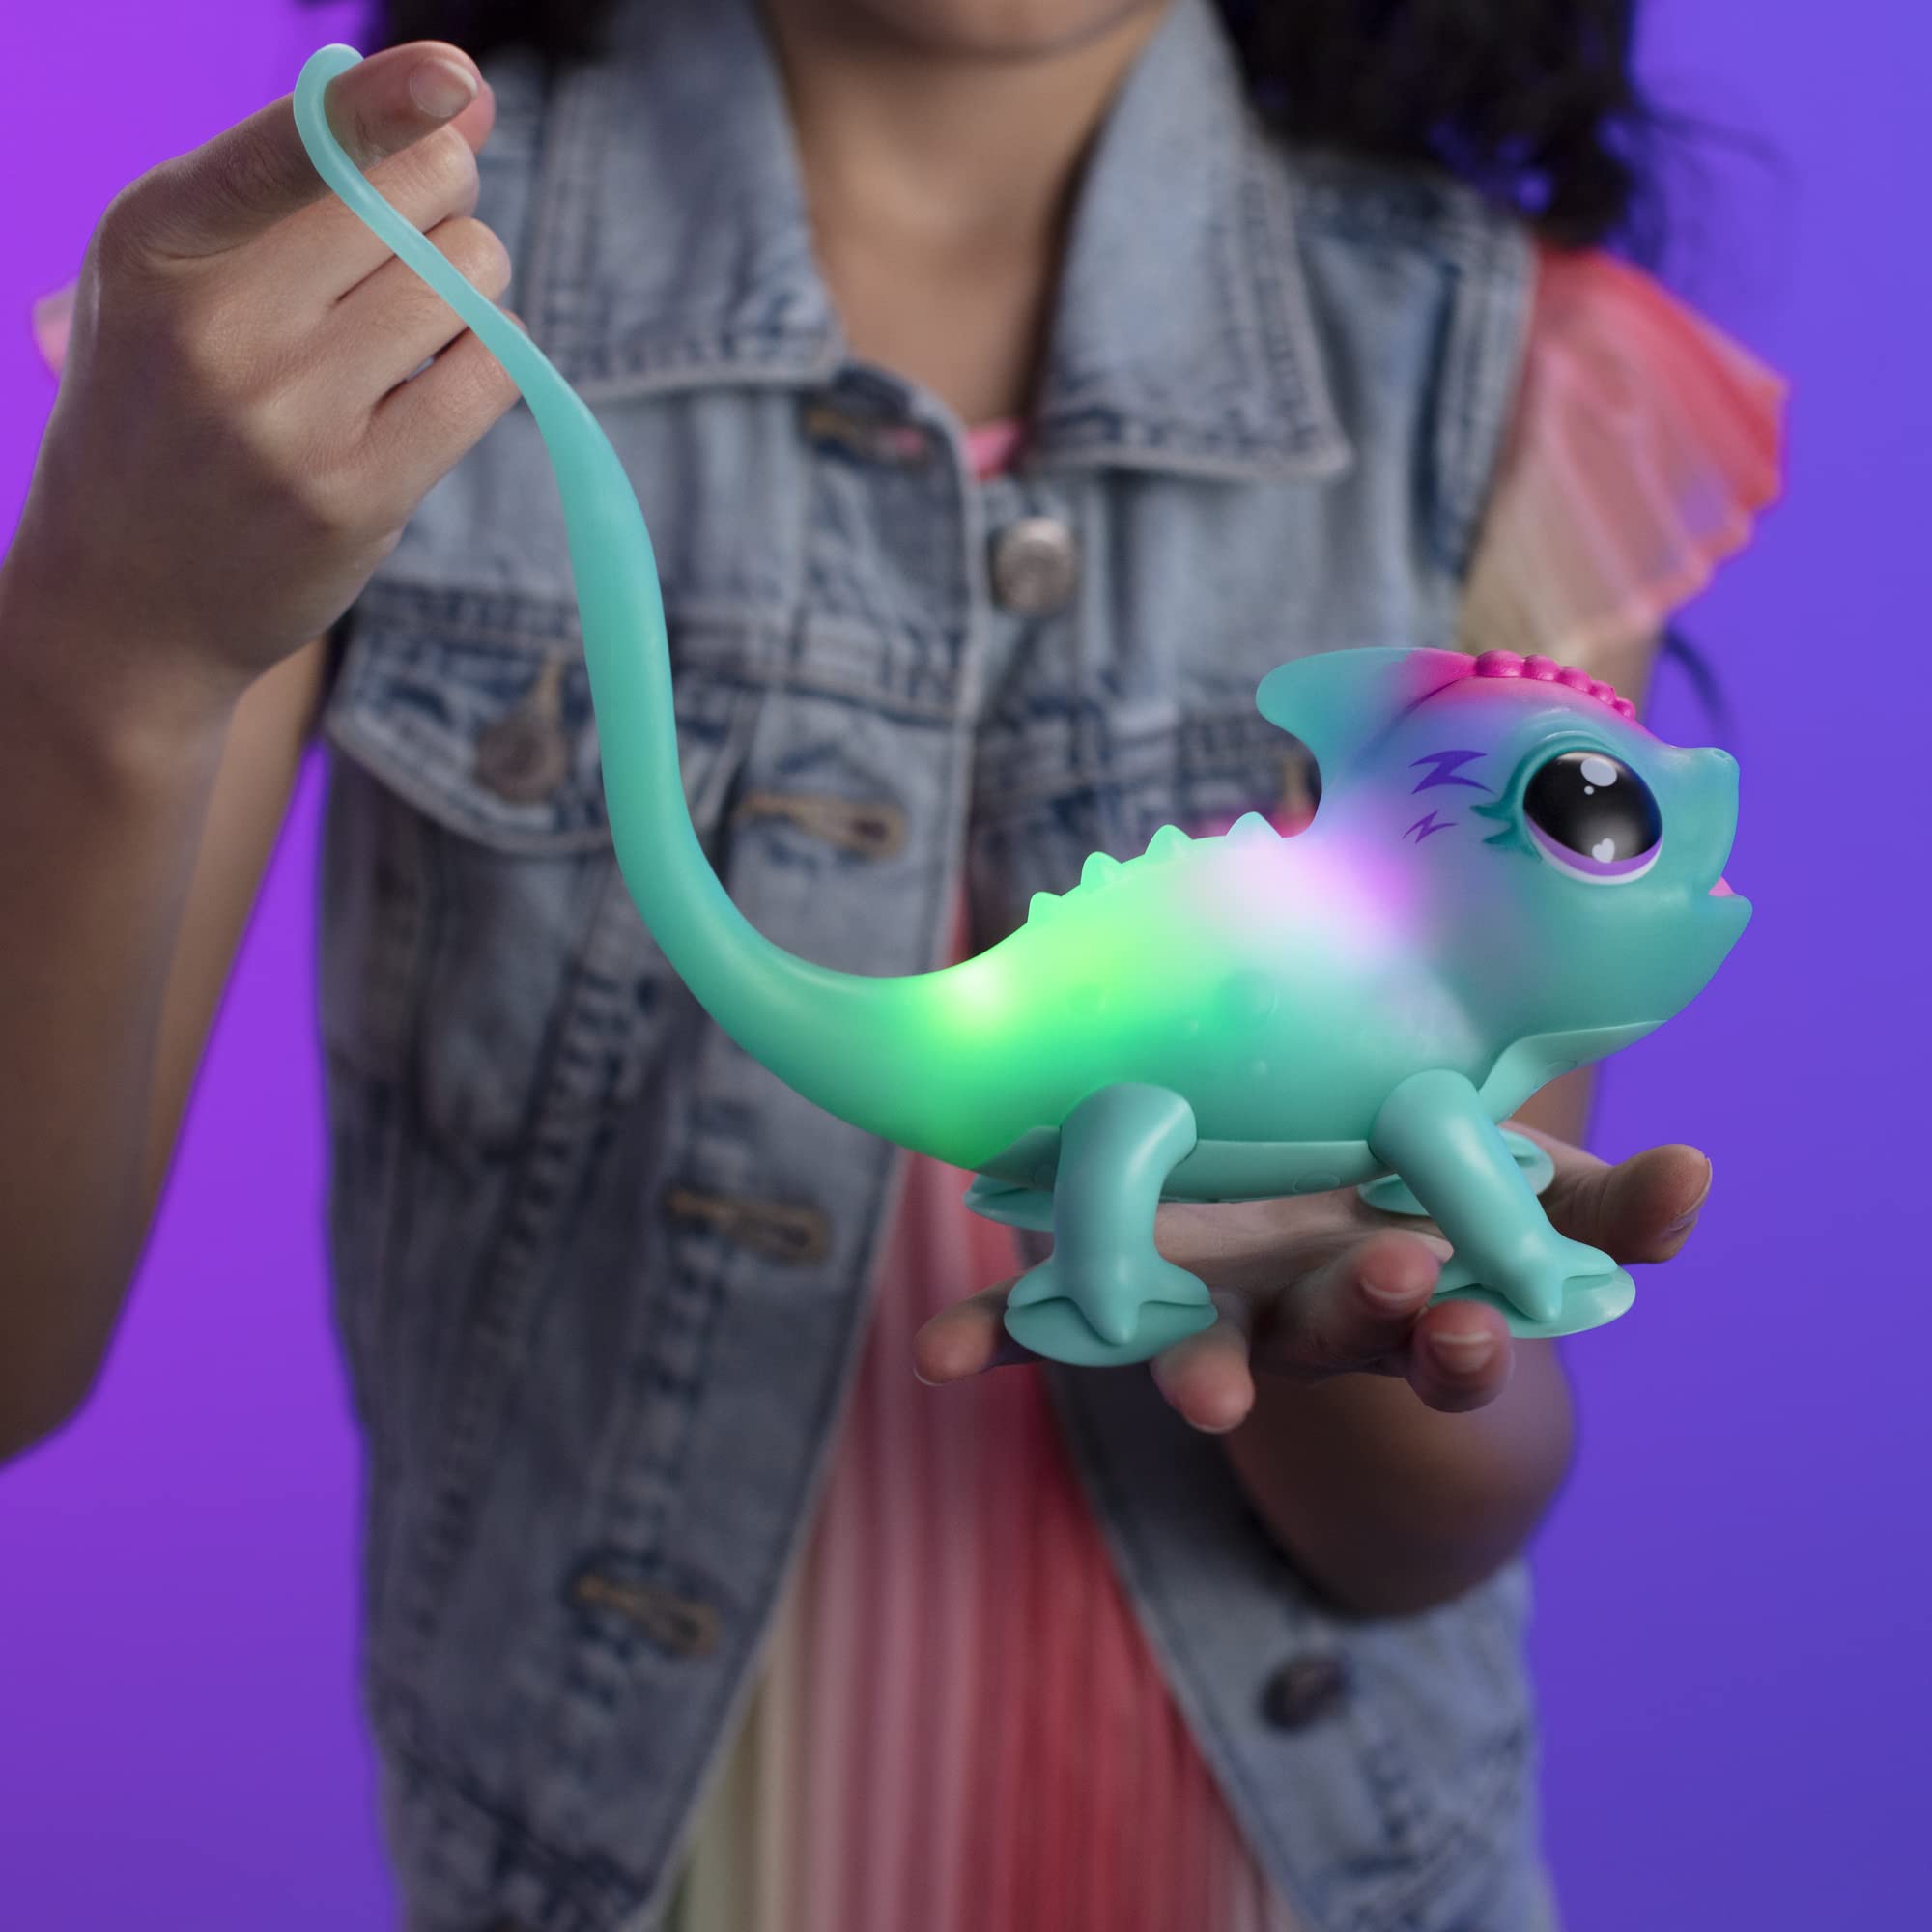 Little Live Pets Chameleon - Interactive Color-Changing Light-Up Toy with 30+ Sounds & Emotions, Repeats Back, Beat Detection (Ages 5+)